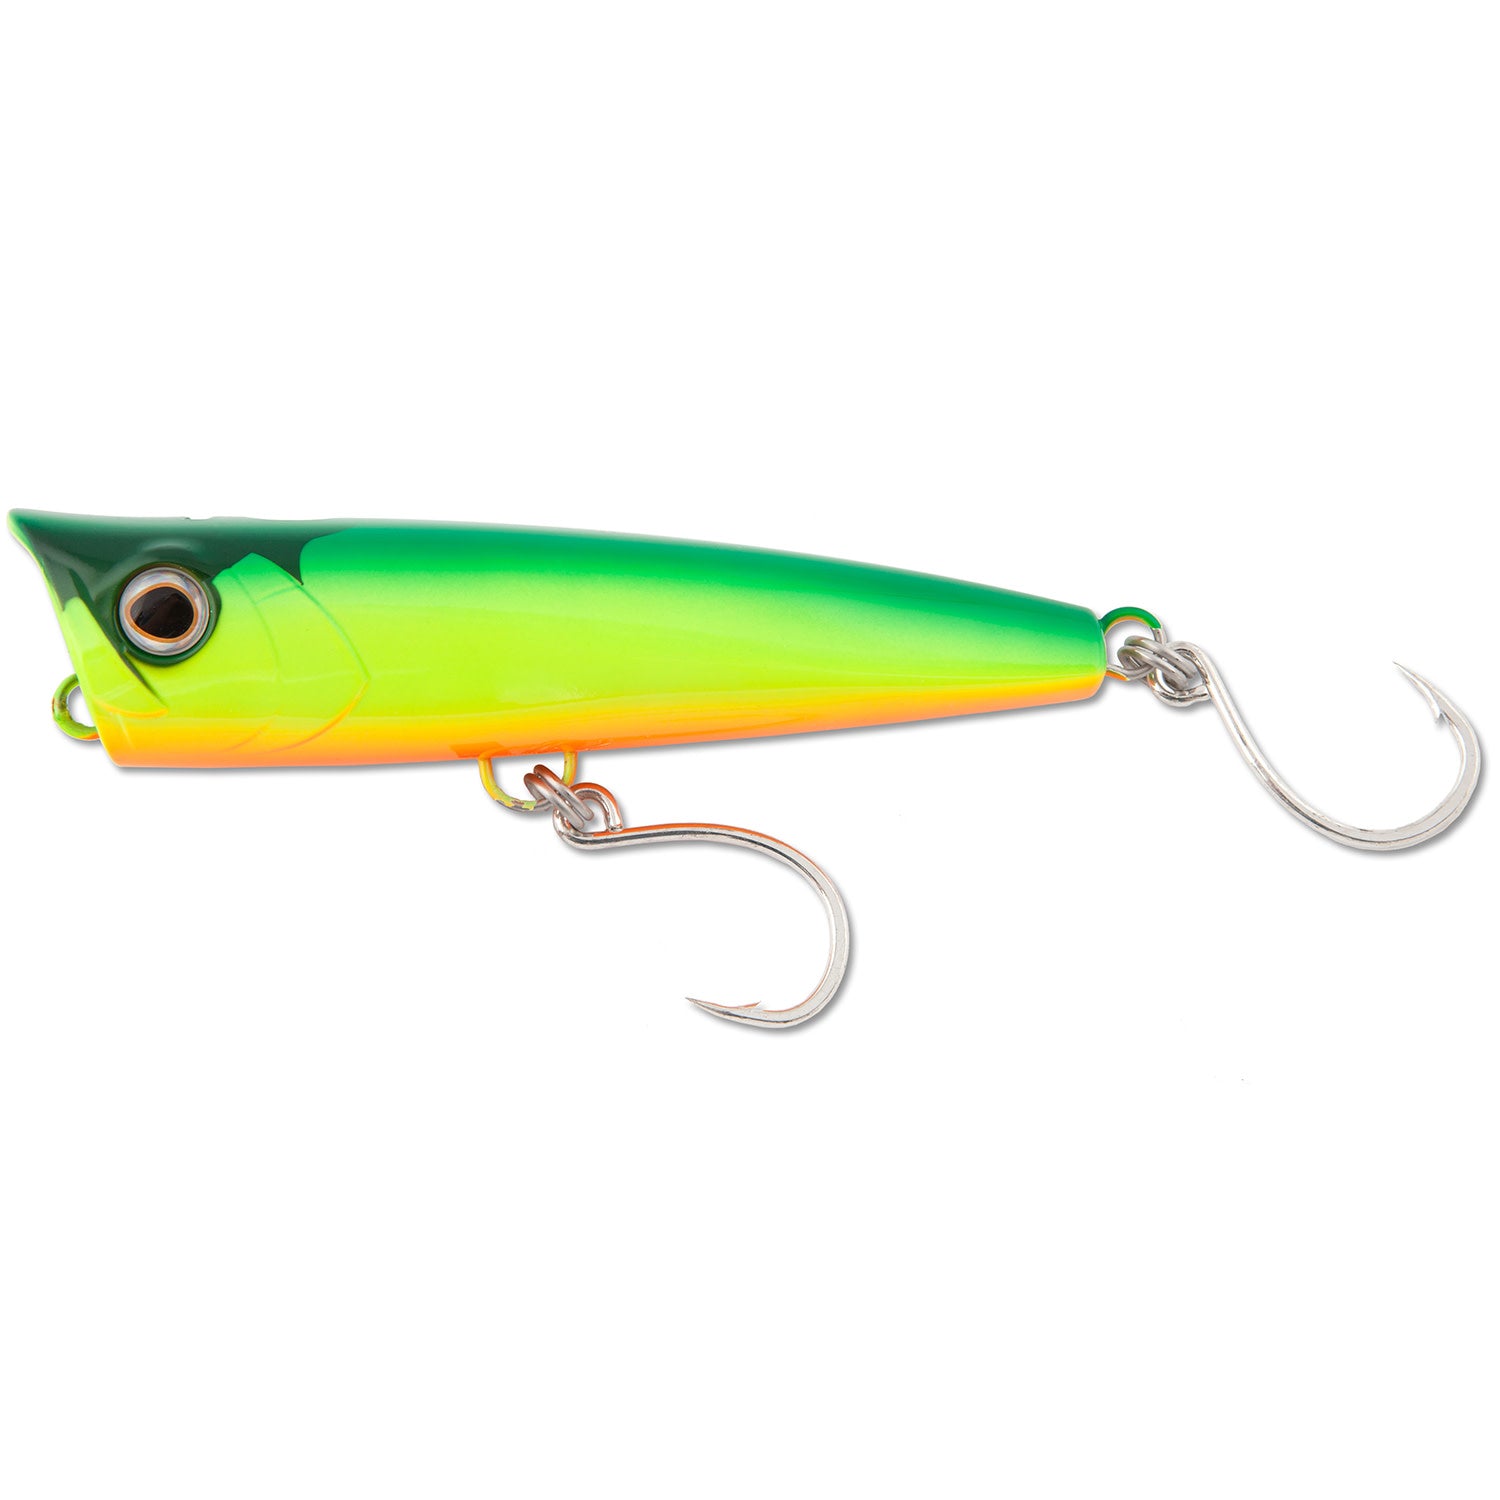 Shimano Pop-Orca Popper Lures - Green Chartreuse / Lenght: 4 1/4 - Weight:  1 7/8oz